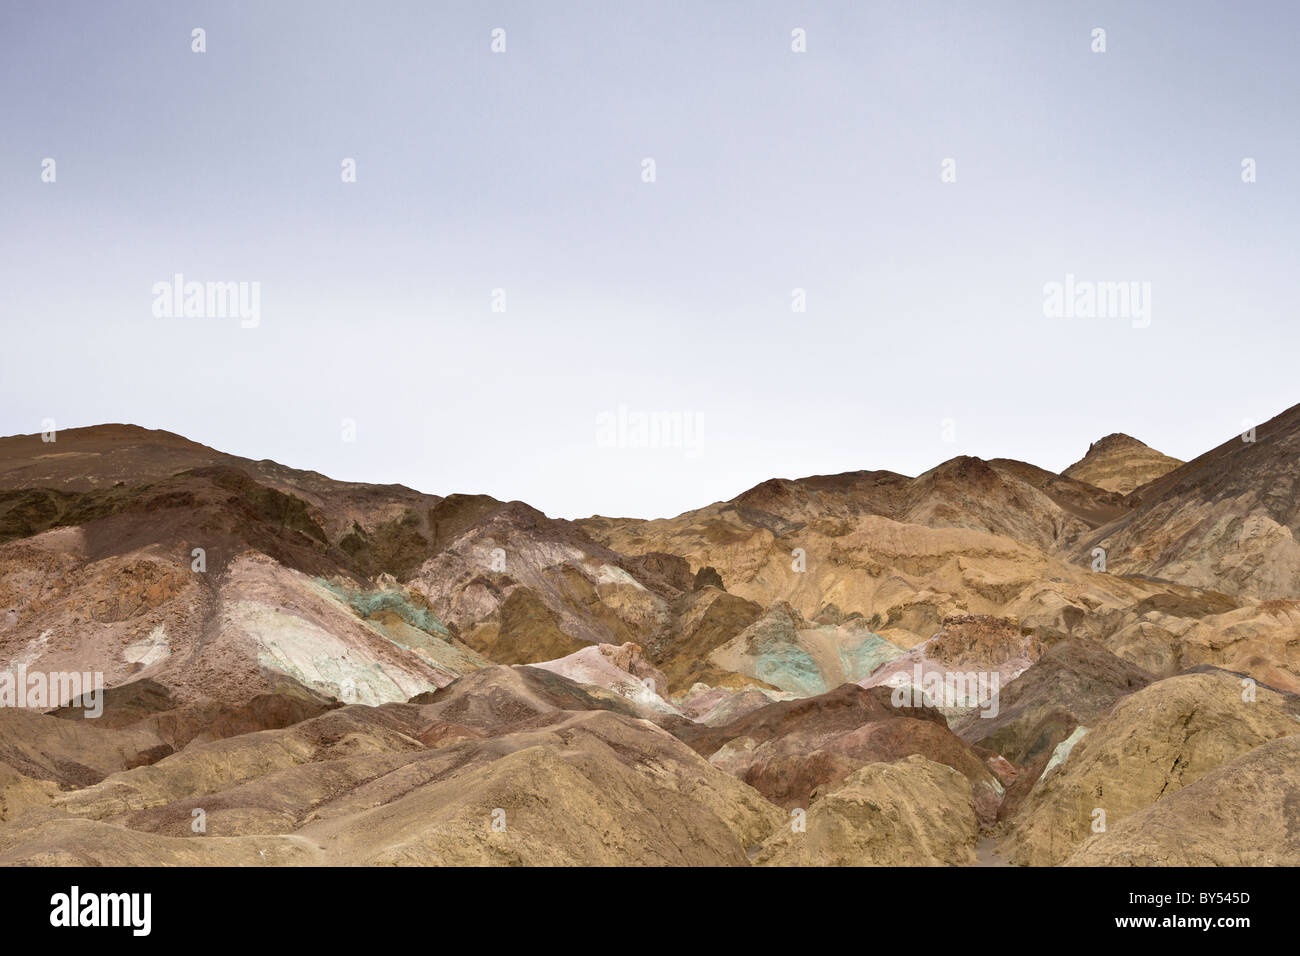 Oxidized minerals form the multicolored Artist's Palette along Artists Drive in Death Valley National Park, California, USA. Stock Photo